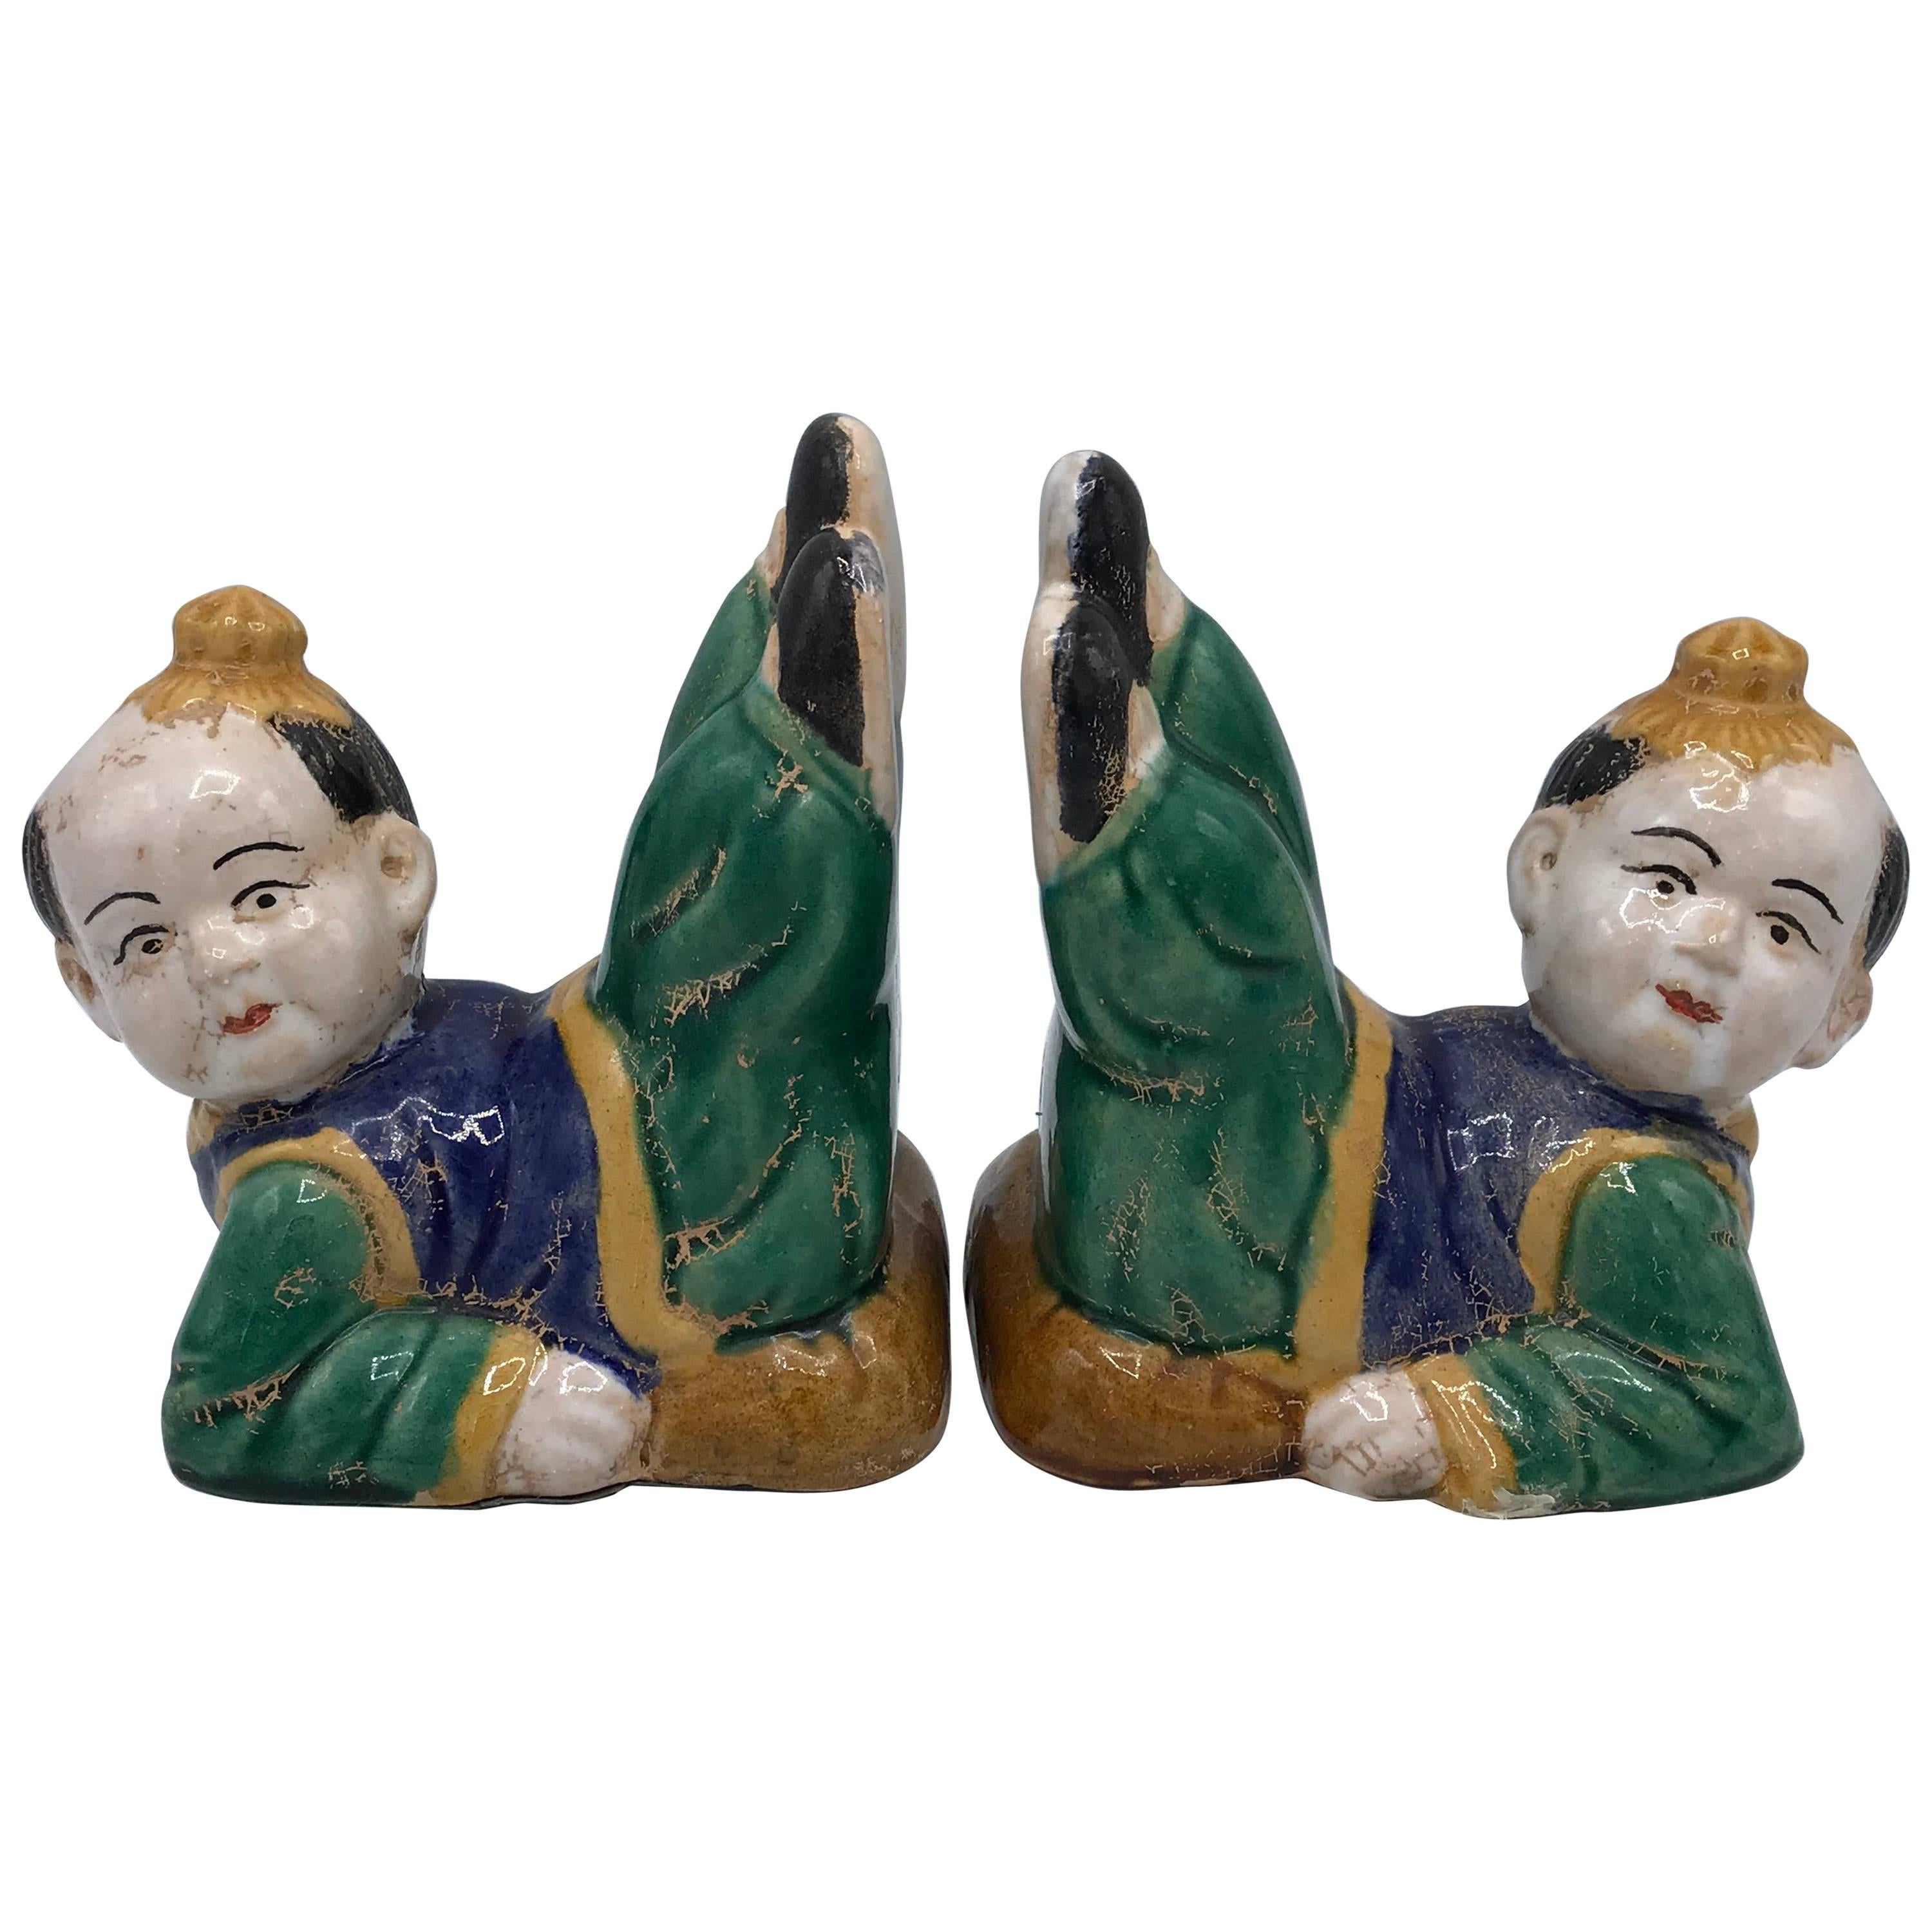 1960s Ceramic Chinoiserie Asian Child Sculptural Bookends, Pair